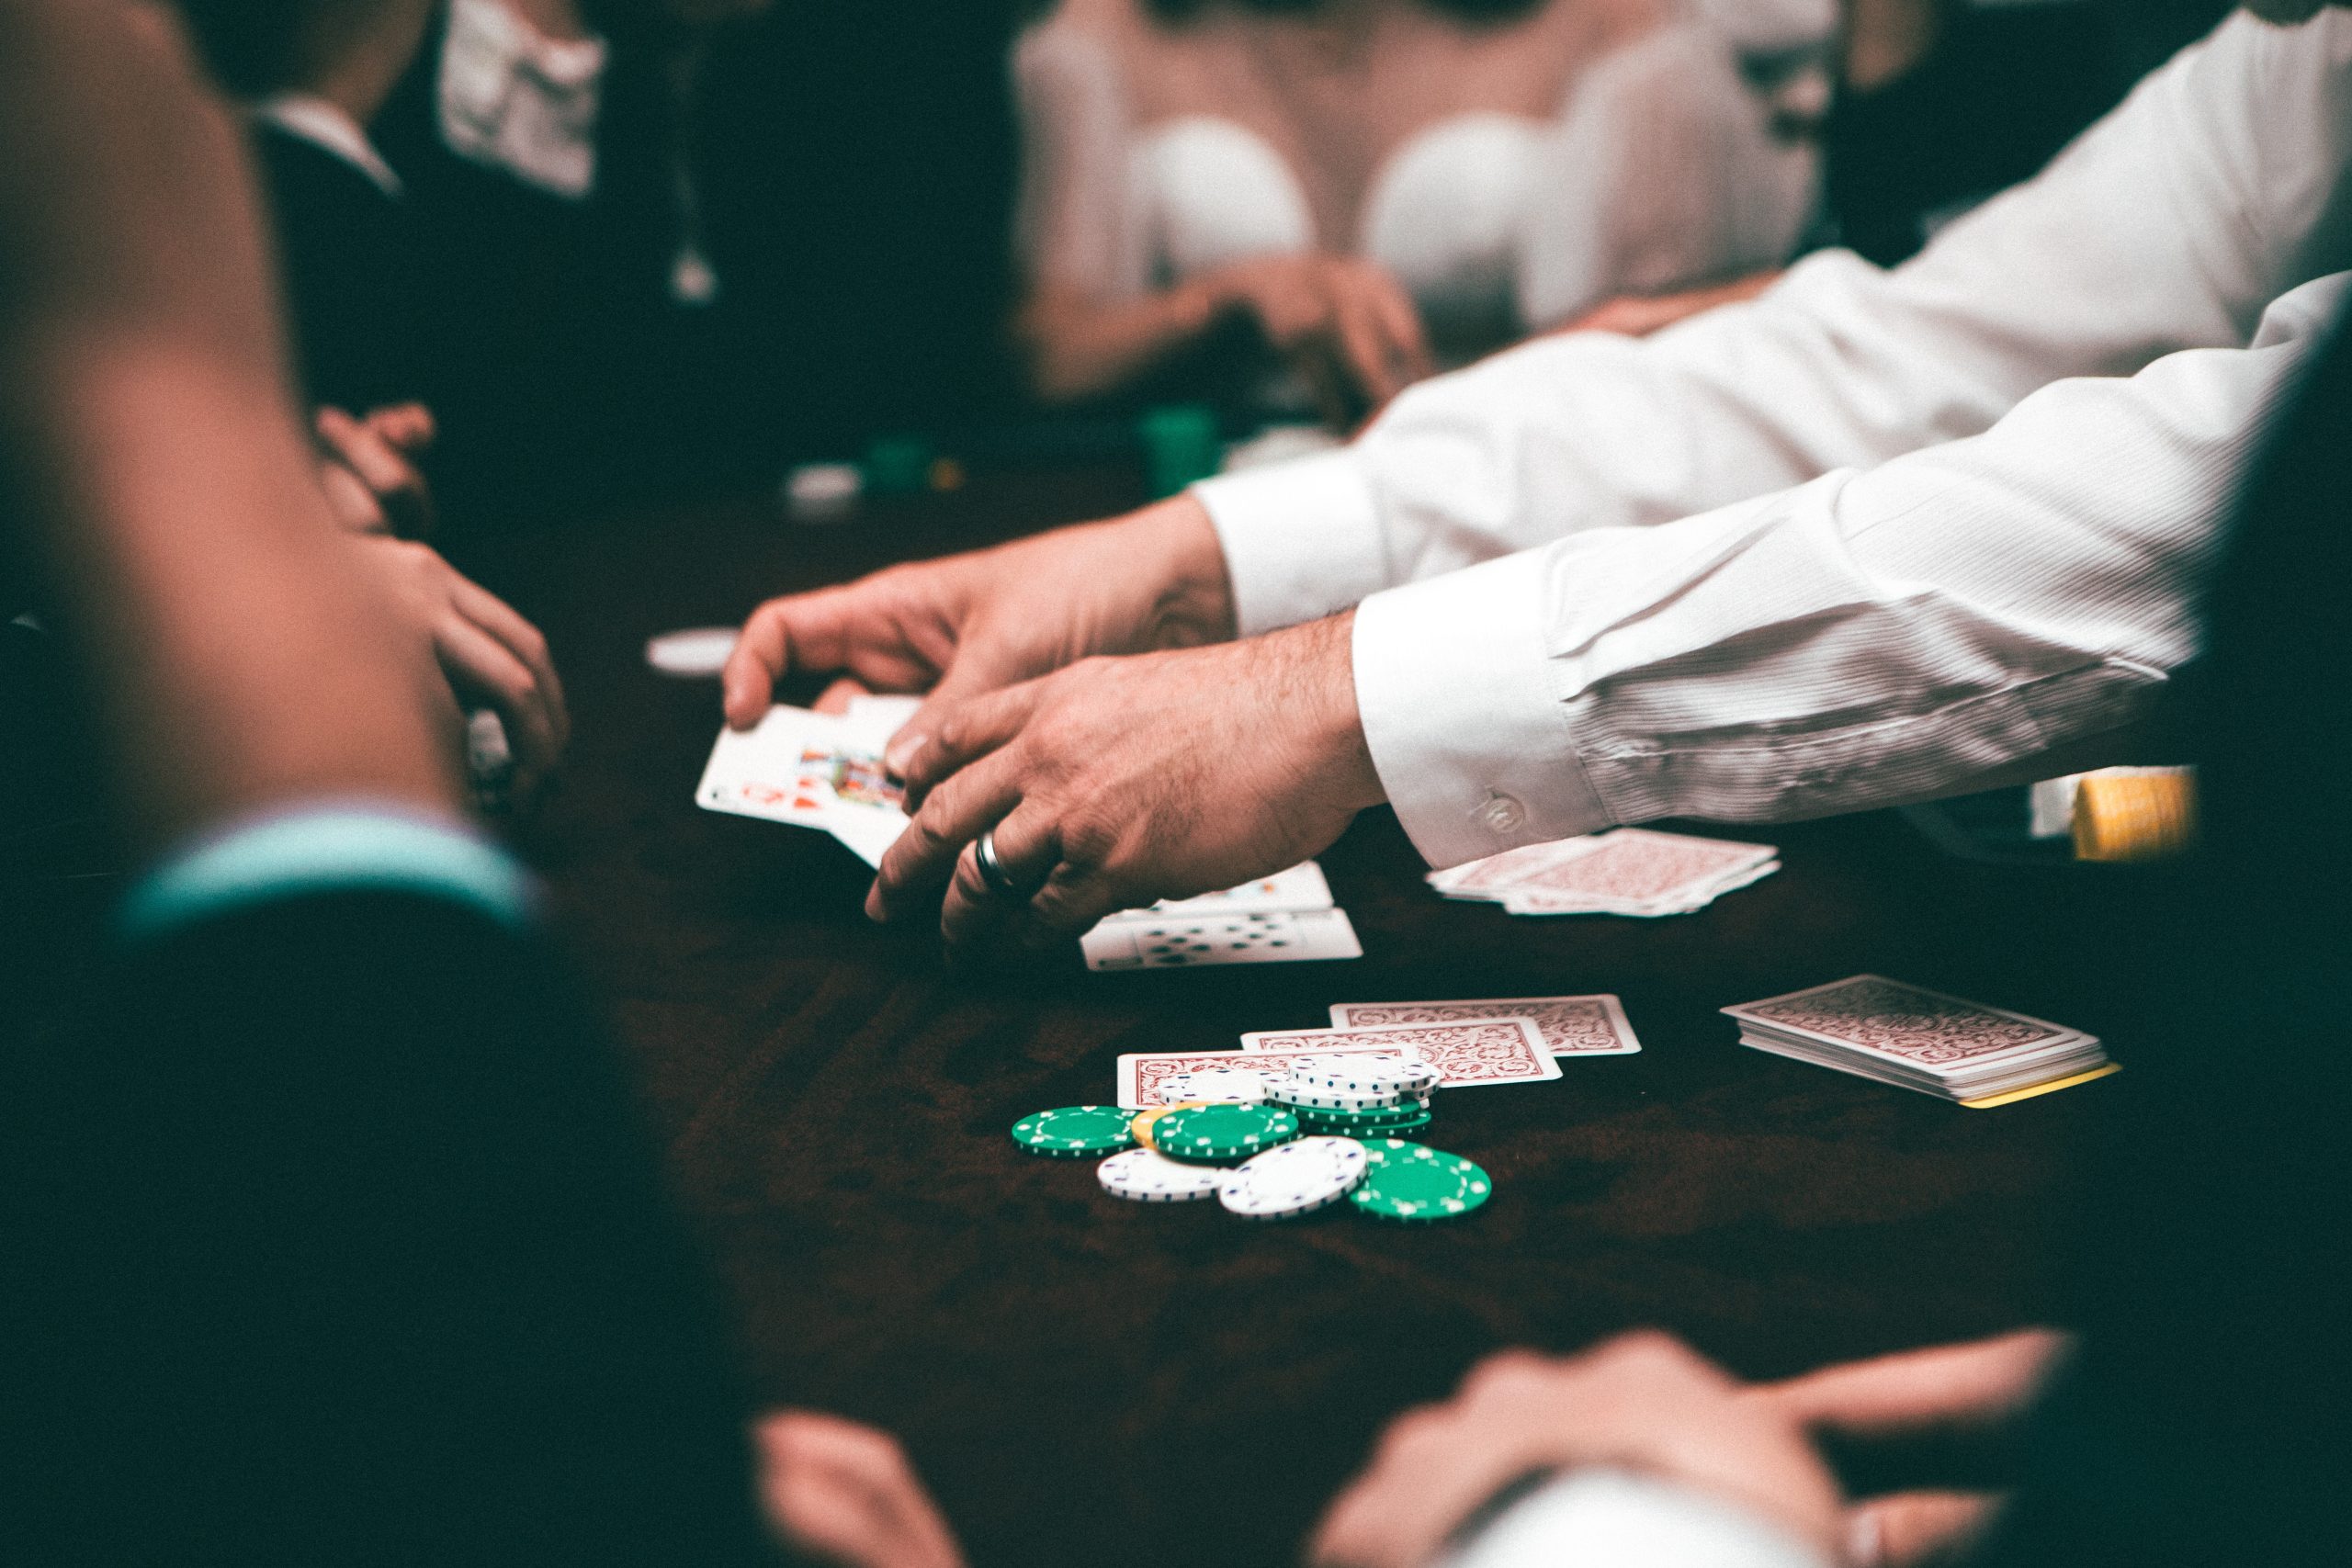 Card Counting in Blackjack: Does it Really Work?